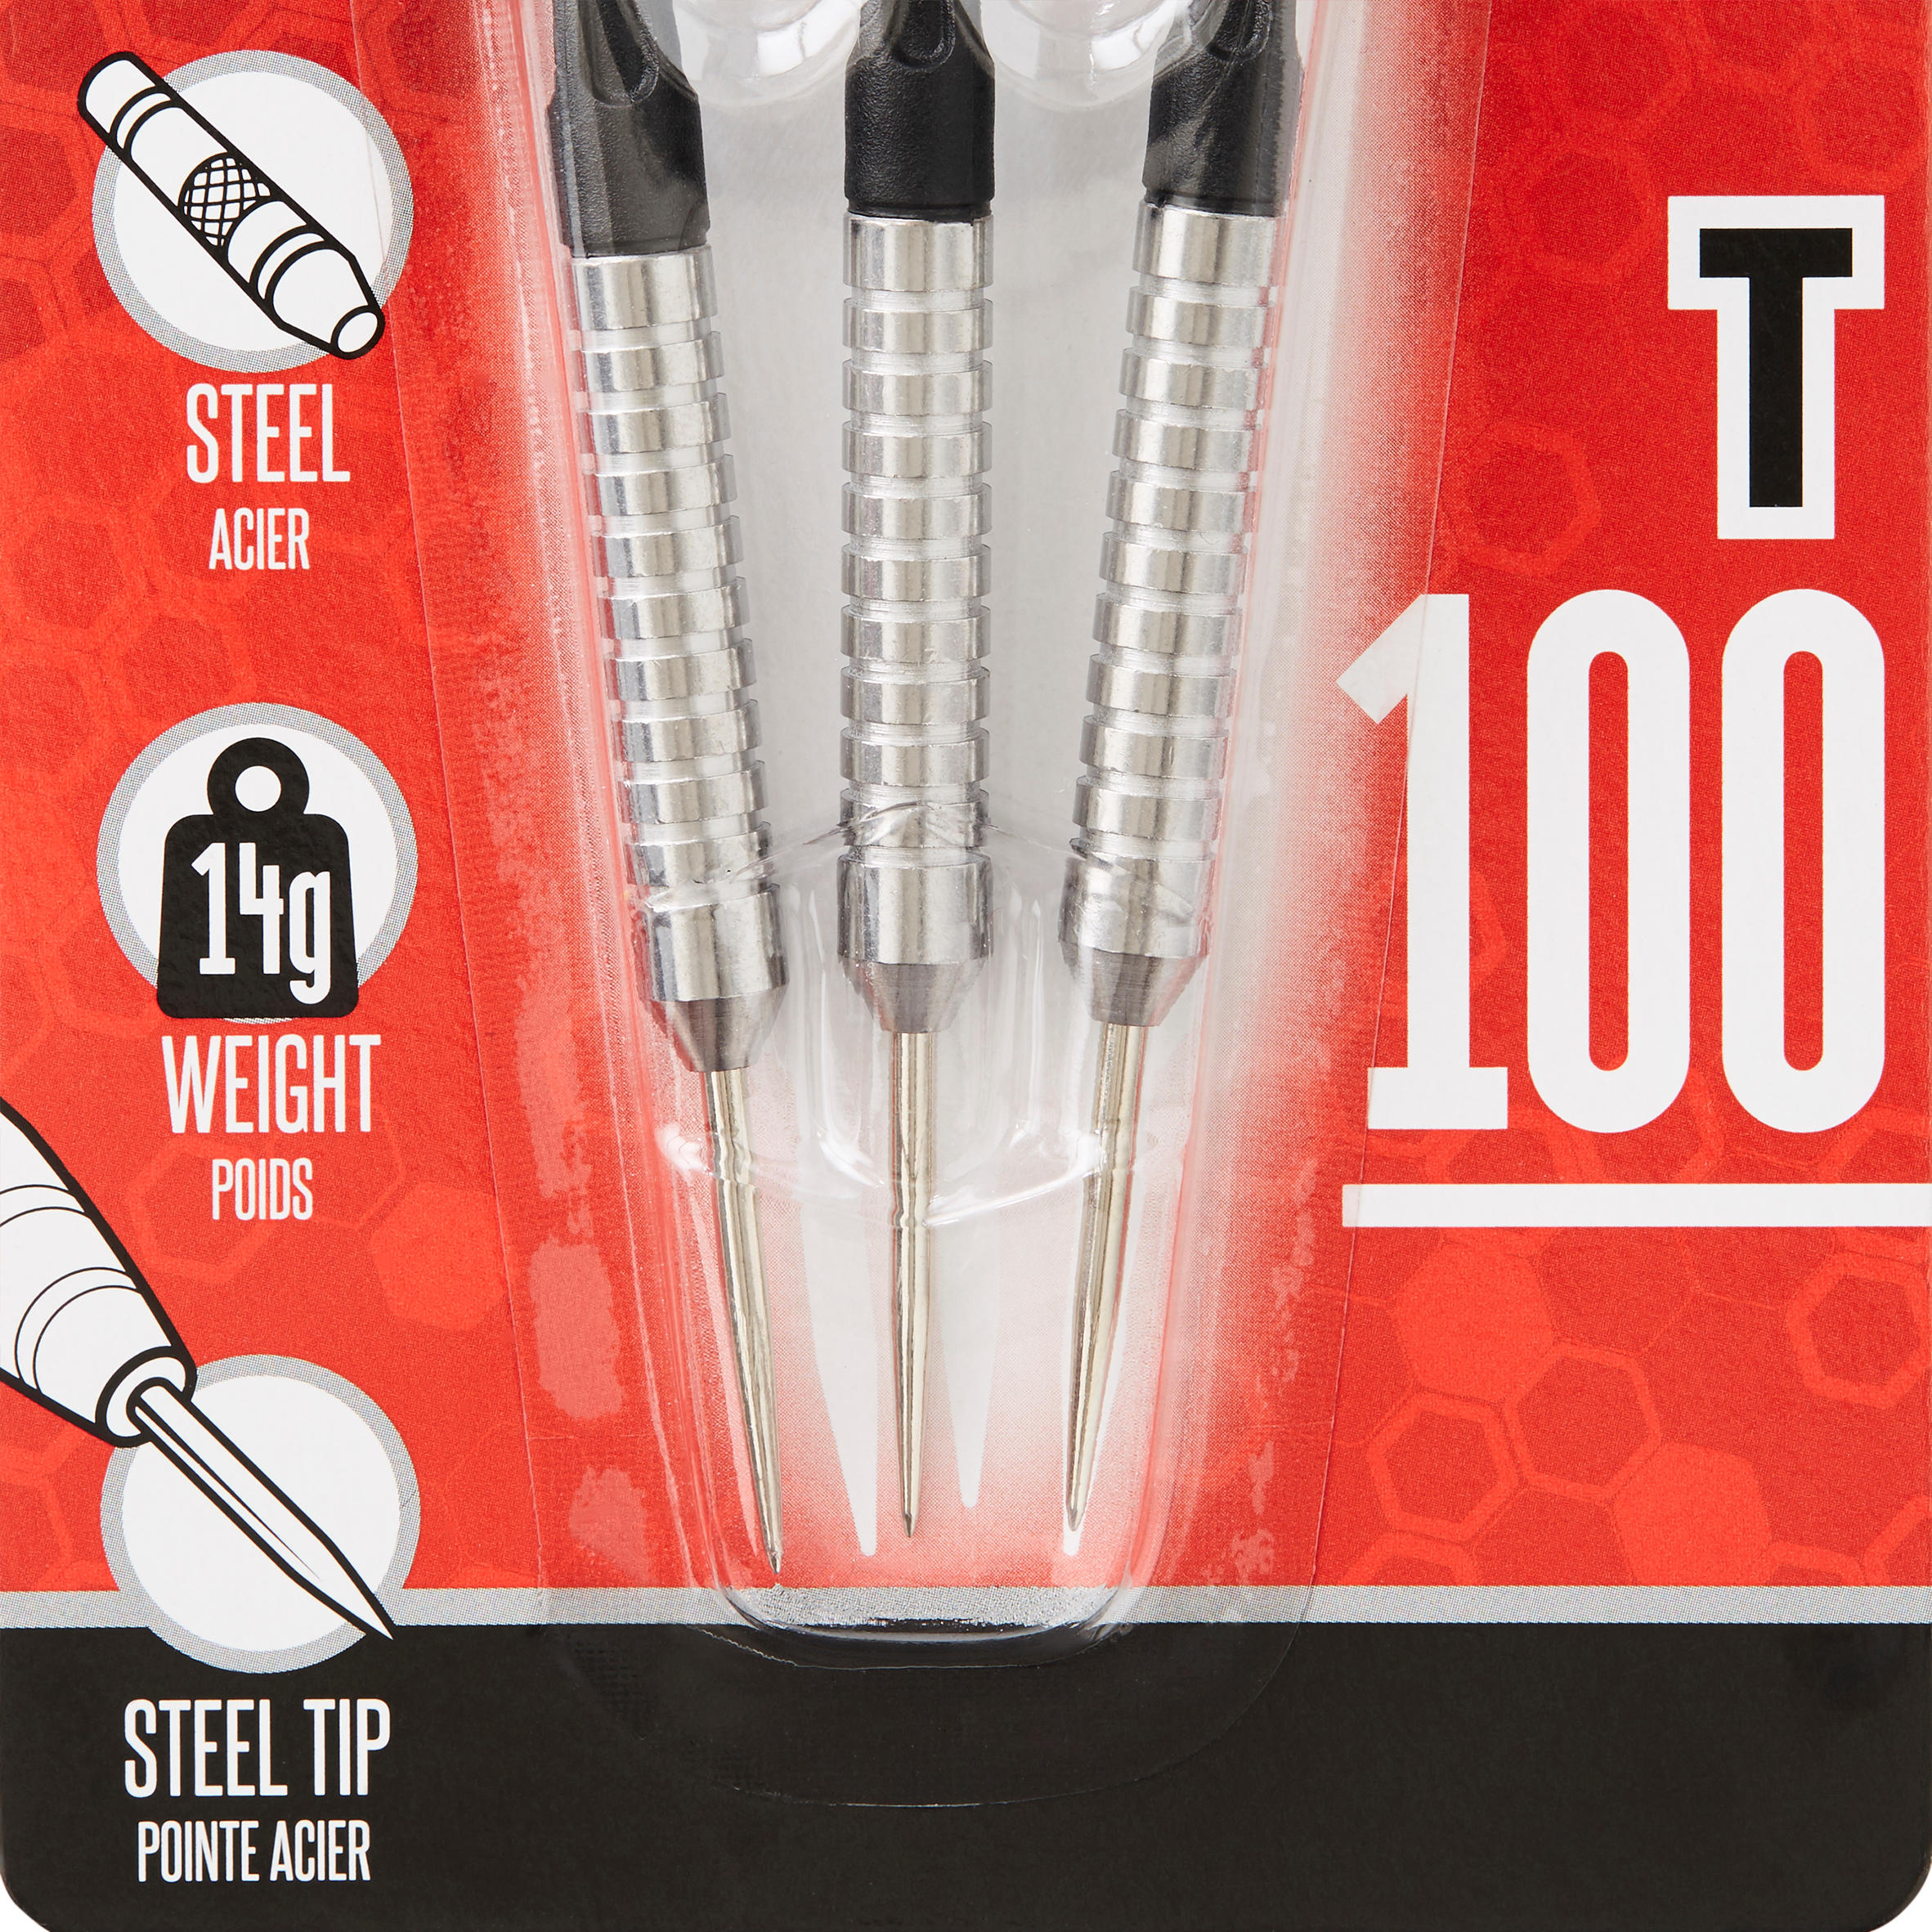 T100 Steel-Tipped Darts Tri-Pack - Black - CANAVERAL